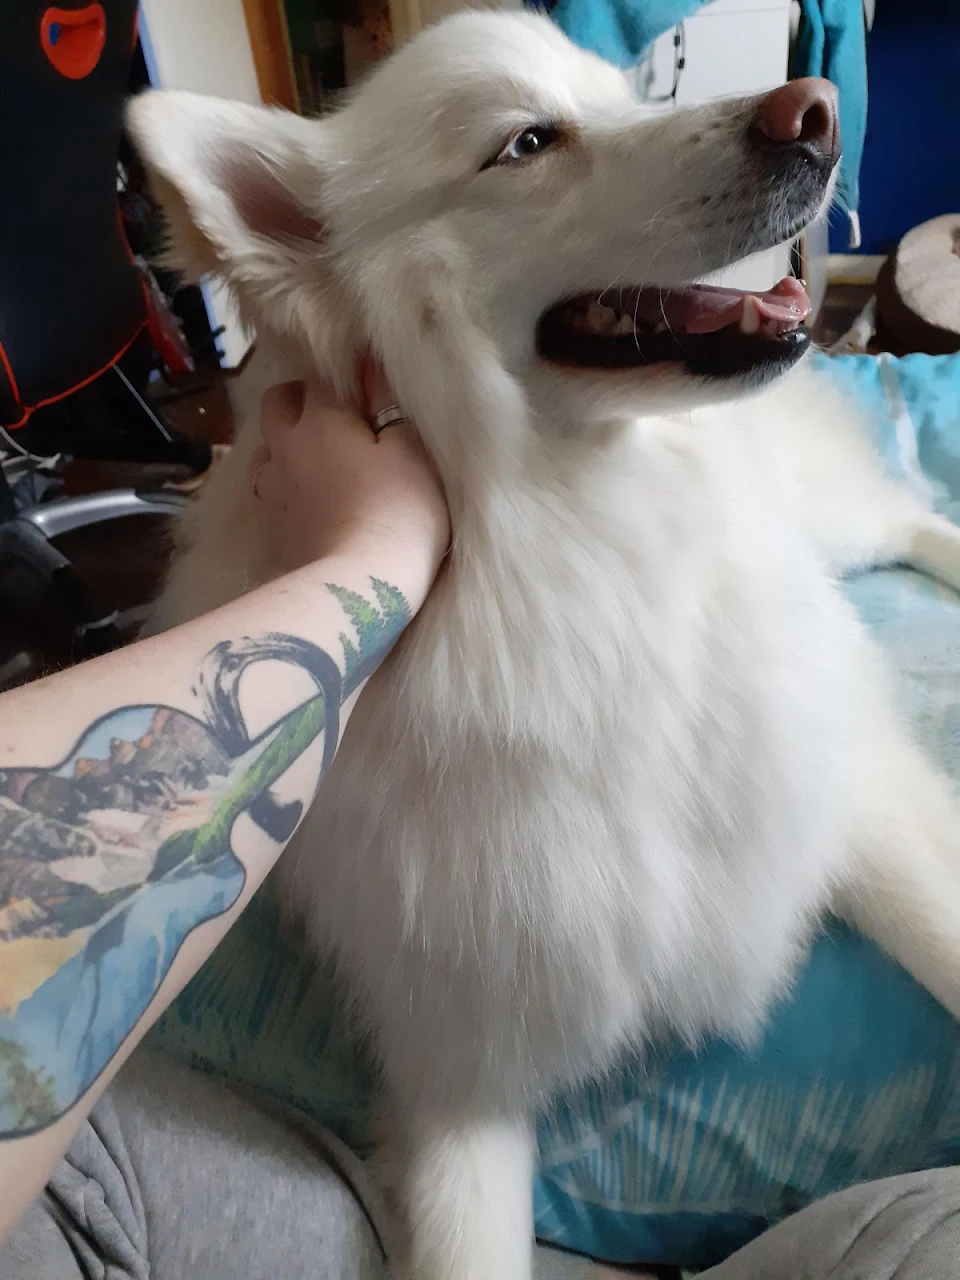 My Pupperoni Pizza is one of the best things to have ever happened in my life since I became disabled. He's saved my life & I'll love him for the rest of his. <3